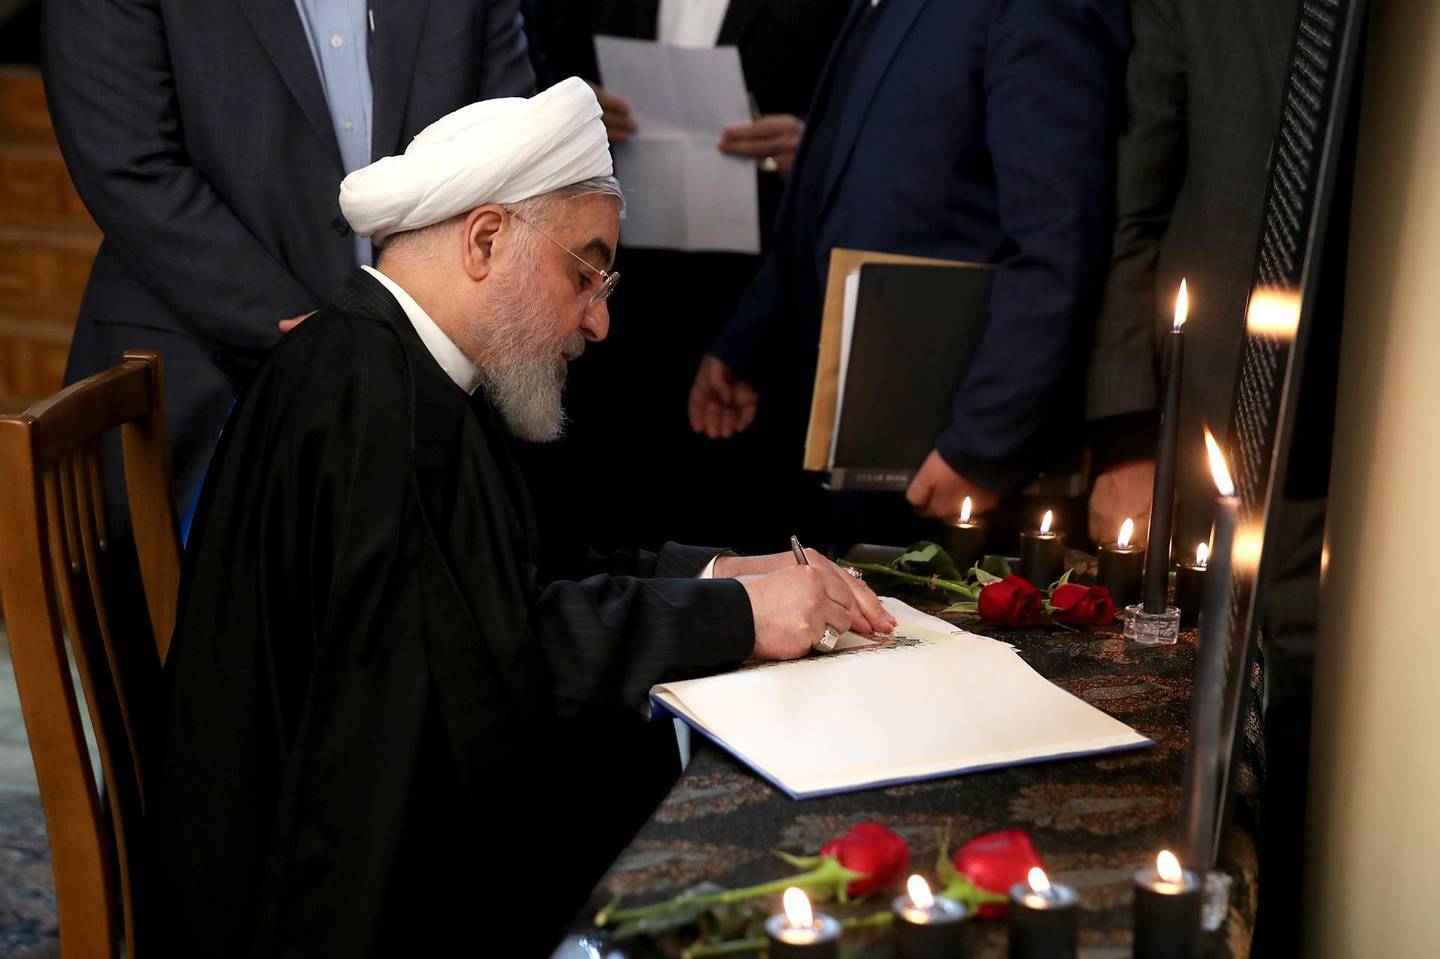 epa08129866 A handout photo made available by the Iranian Presidential Office shows Iranian President Hassan Rouhani signing a book carrying the names of the victims of the Ukraine International Airlines Flight 752 downing, after a cabinet meeting in Tehran, Iran, 15 January 2020. According to media reports, Rouhani said in a televised cabinet meeting that the accidental shooting down of a Ukrainian airliner on 08 January was an unforgivable error and that all those responsible will be punished.  EPA/IRANIAN PRESIDENTIAL OFFICE HANDOUT  HANDOUT EDITORIAL USE ONLY/NO SALES HANDOUT EDITORIAL USE ONLY/NO SALES